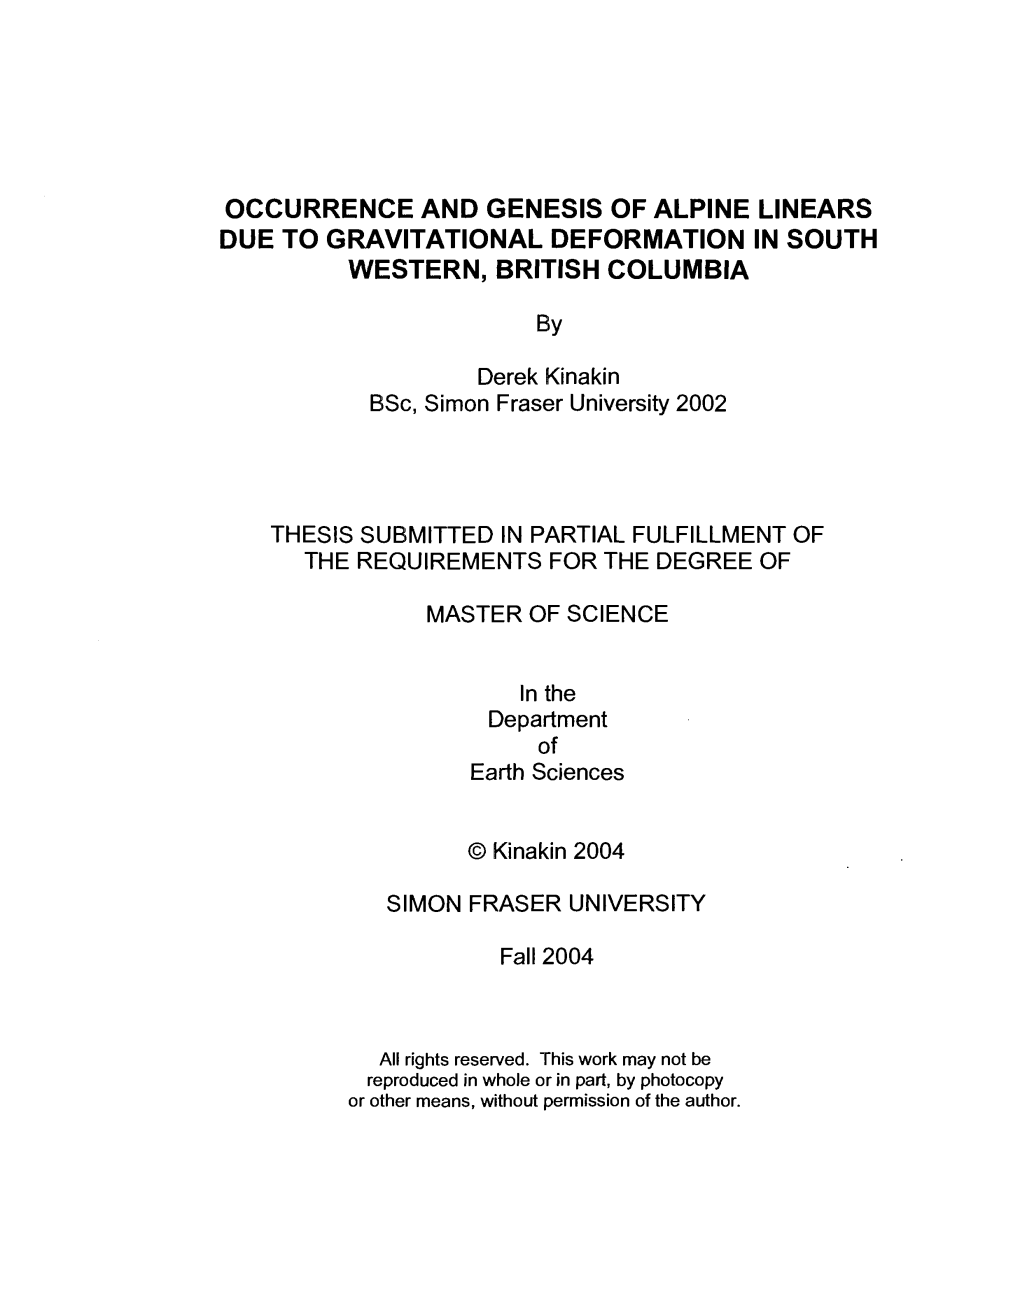 Occurrence and Genesis of Apline Linears Due To